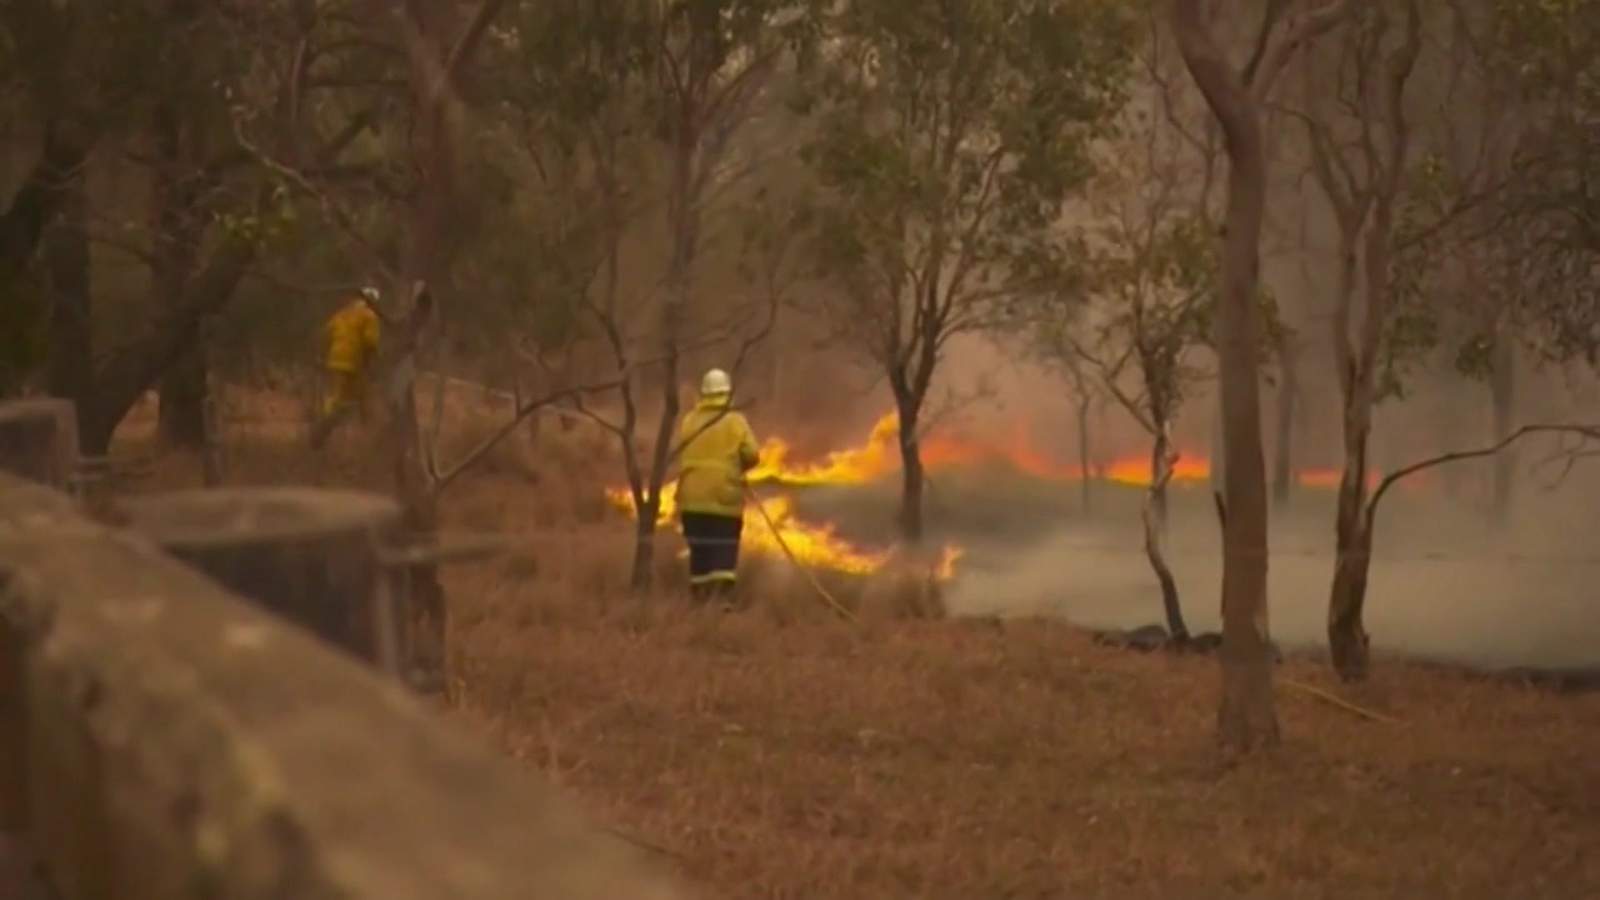 Local fire chief, who worked in Australia, explains why it’s so hard to contain the wildfires